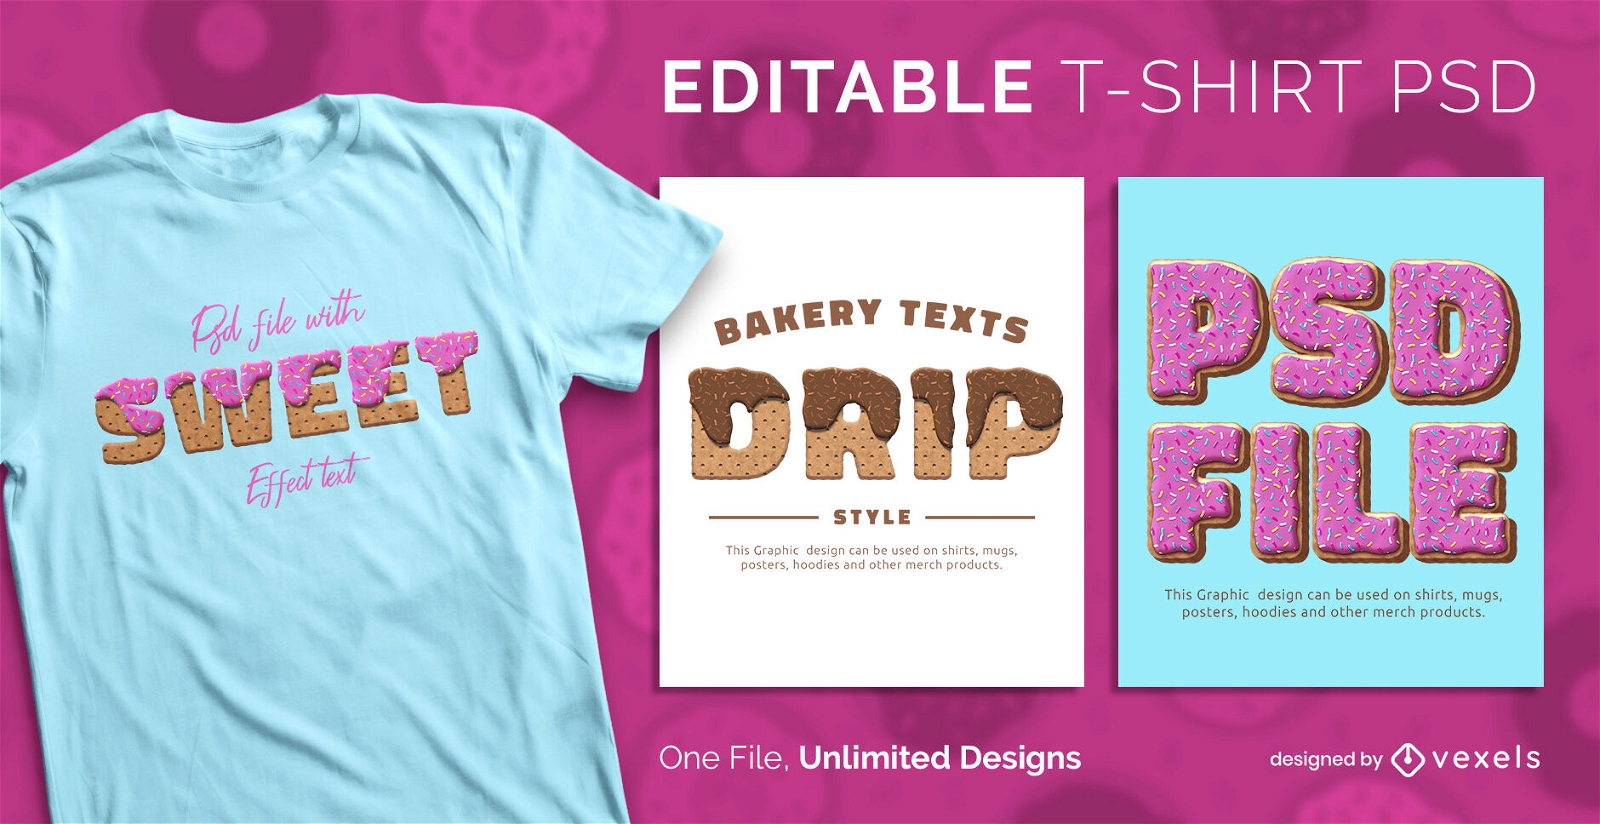 Sweet donut texts scalable t-shirt psd